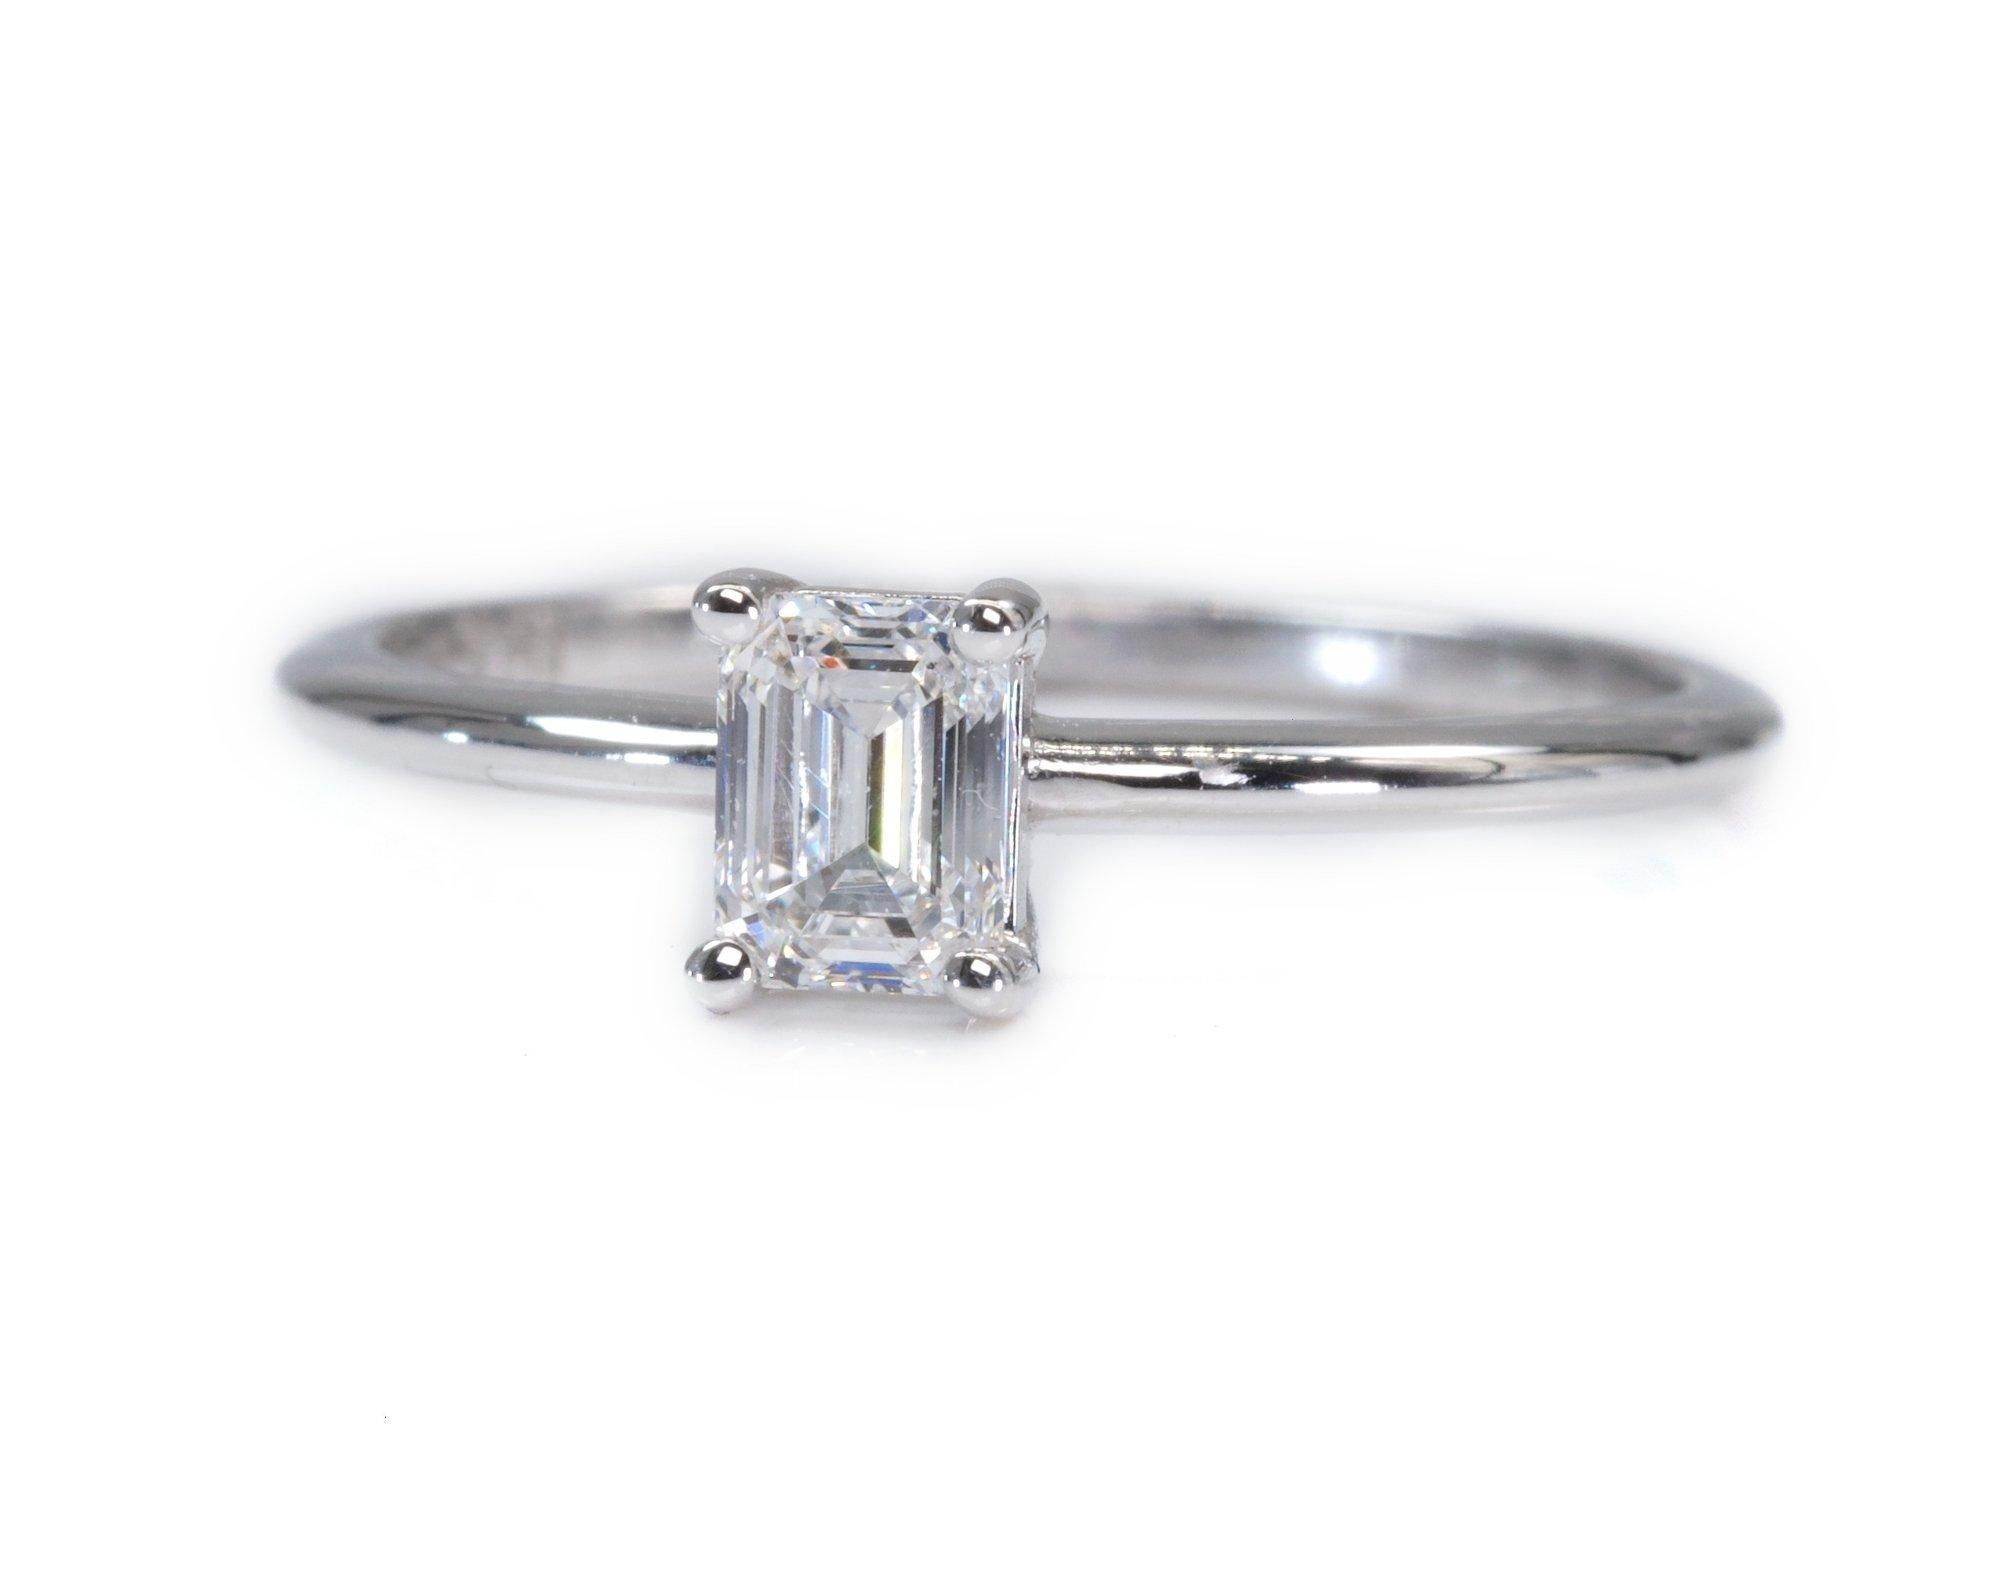 A beautiful classic solitaire ring with a dazzling 0.71 carat emerald cut natural diamond in D VS1, the whitest and highest possible colour of a diamond. The jewelry is made of 18K white gold with a high quality polish. The main stone is engraved